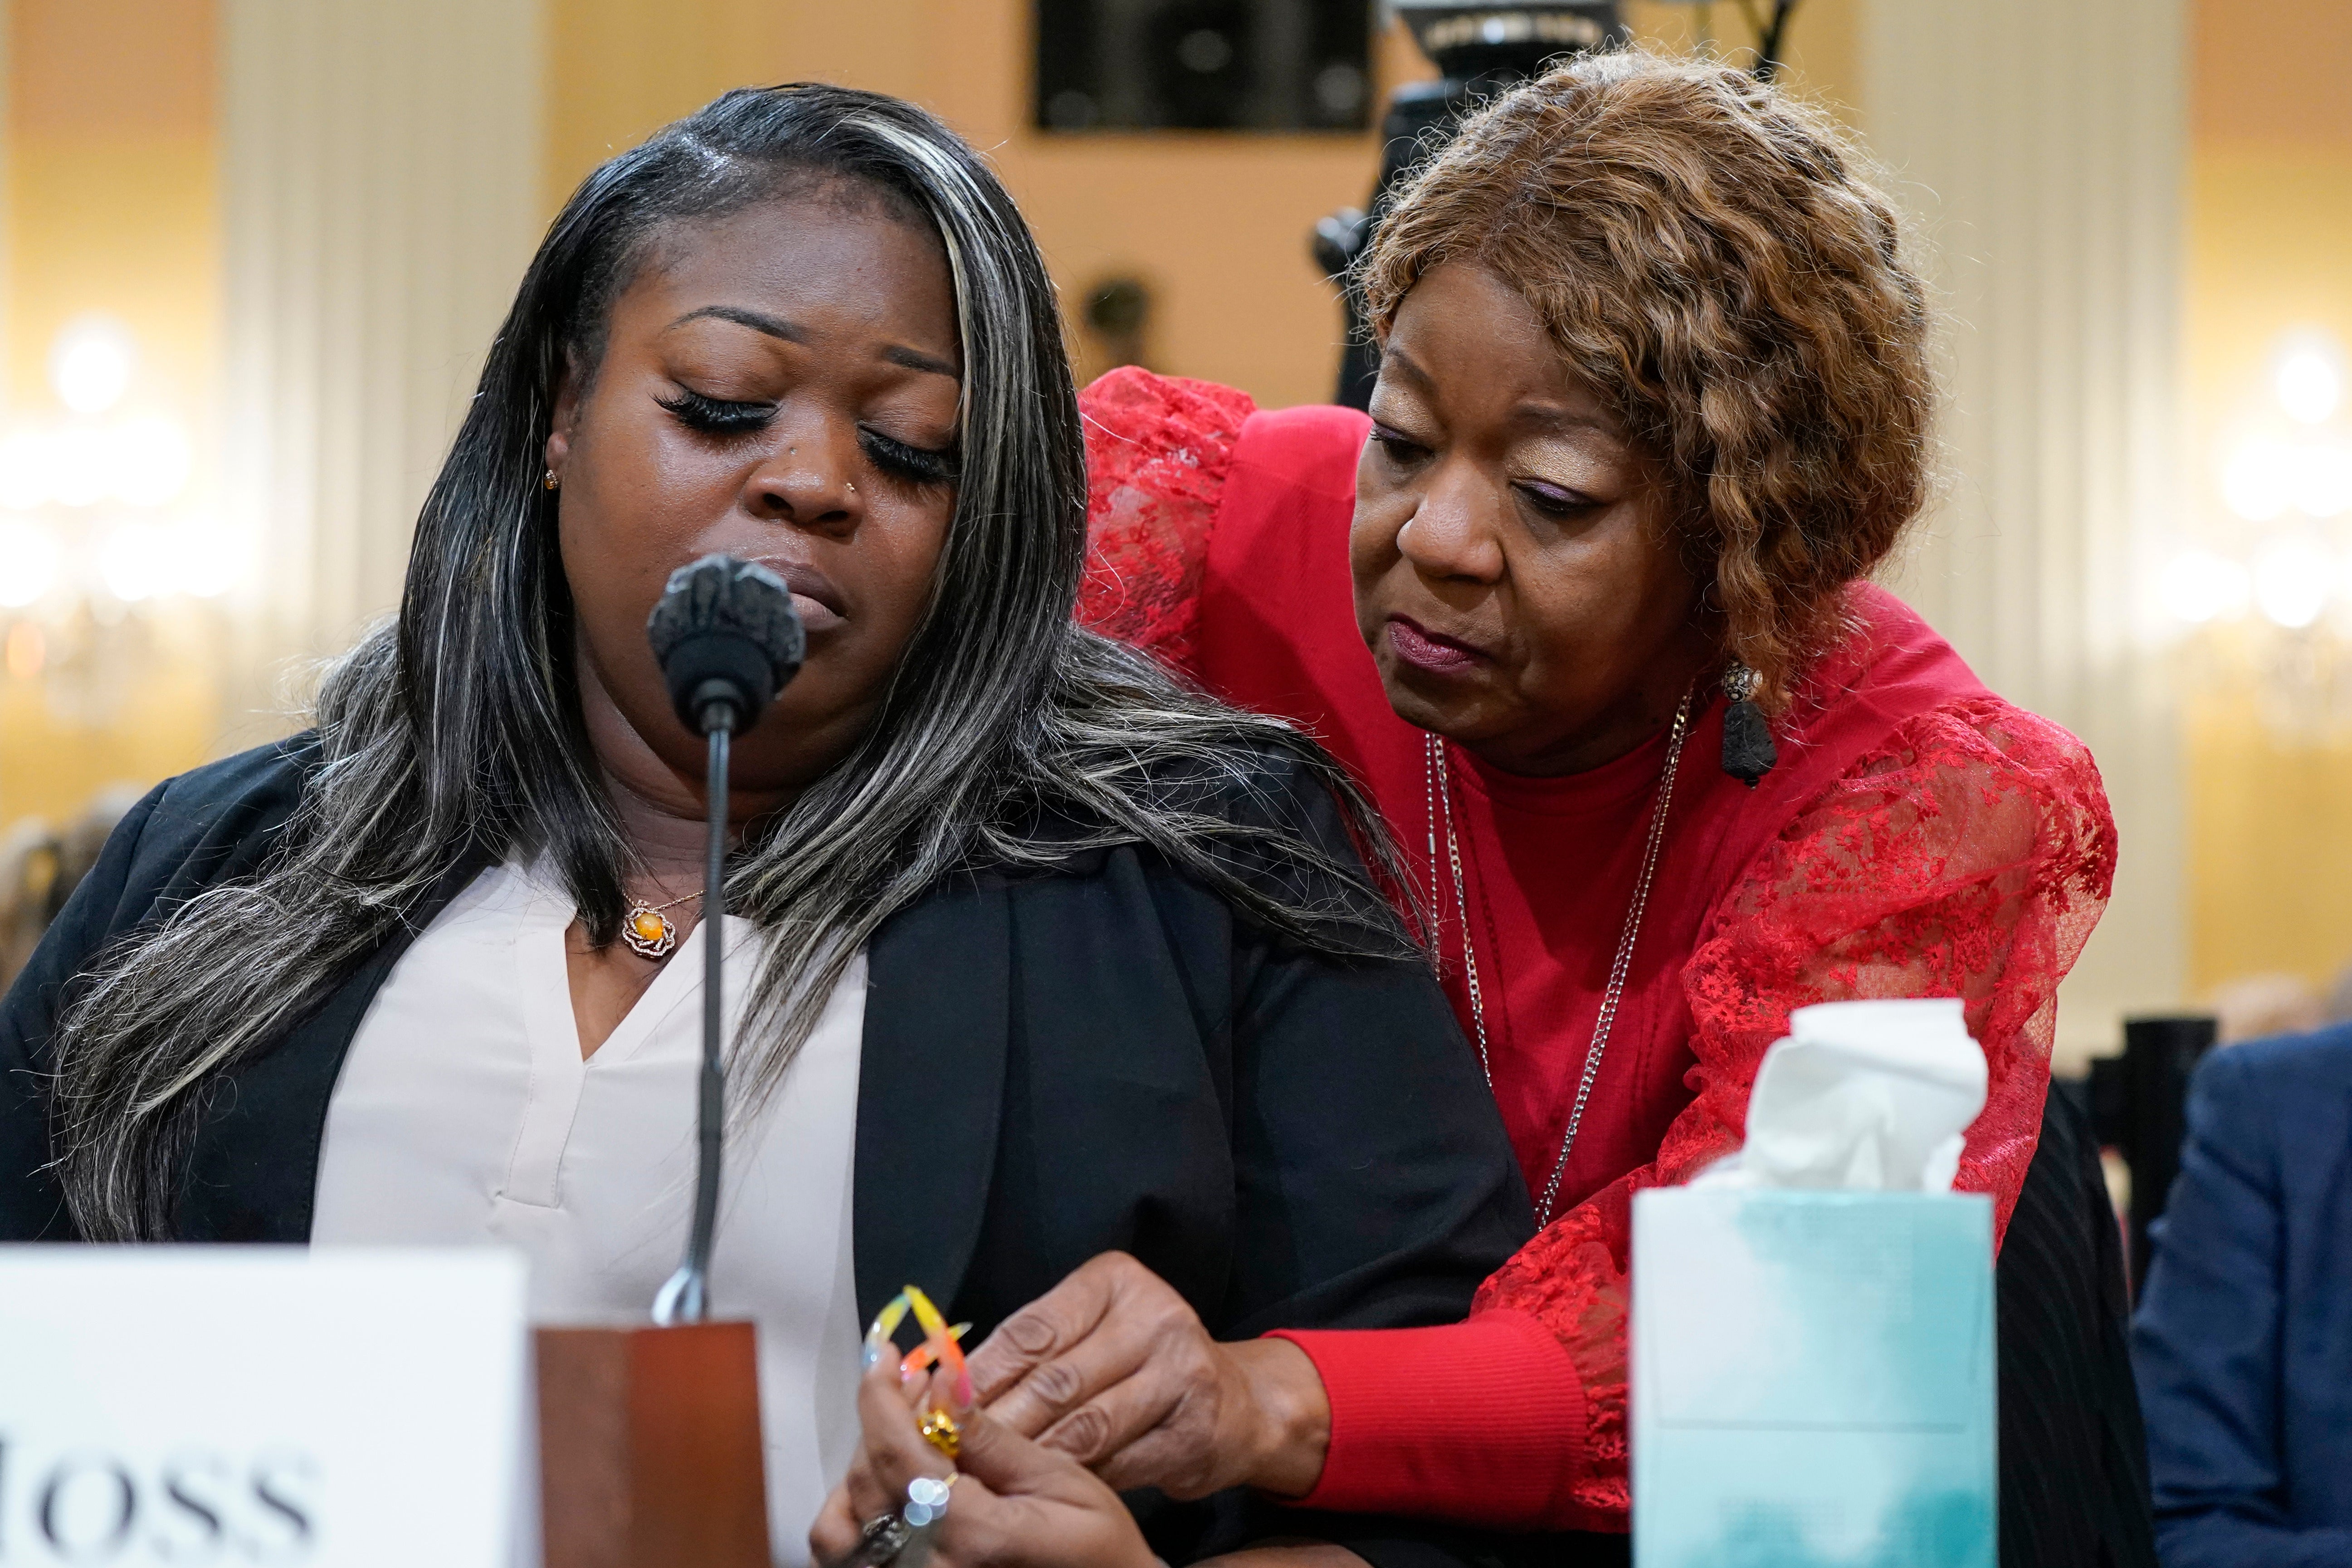 Wandrea ‘Shaye’ Moss, a former Georgia election worker, is comforted by her mother, Ruby Freeman, right, as the House select committee investigating the Jan. 6 attack on the U.S. Capitol holds a hearing at the Capitol in Washington, June 21, 2022